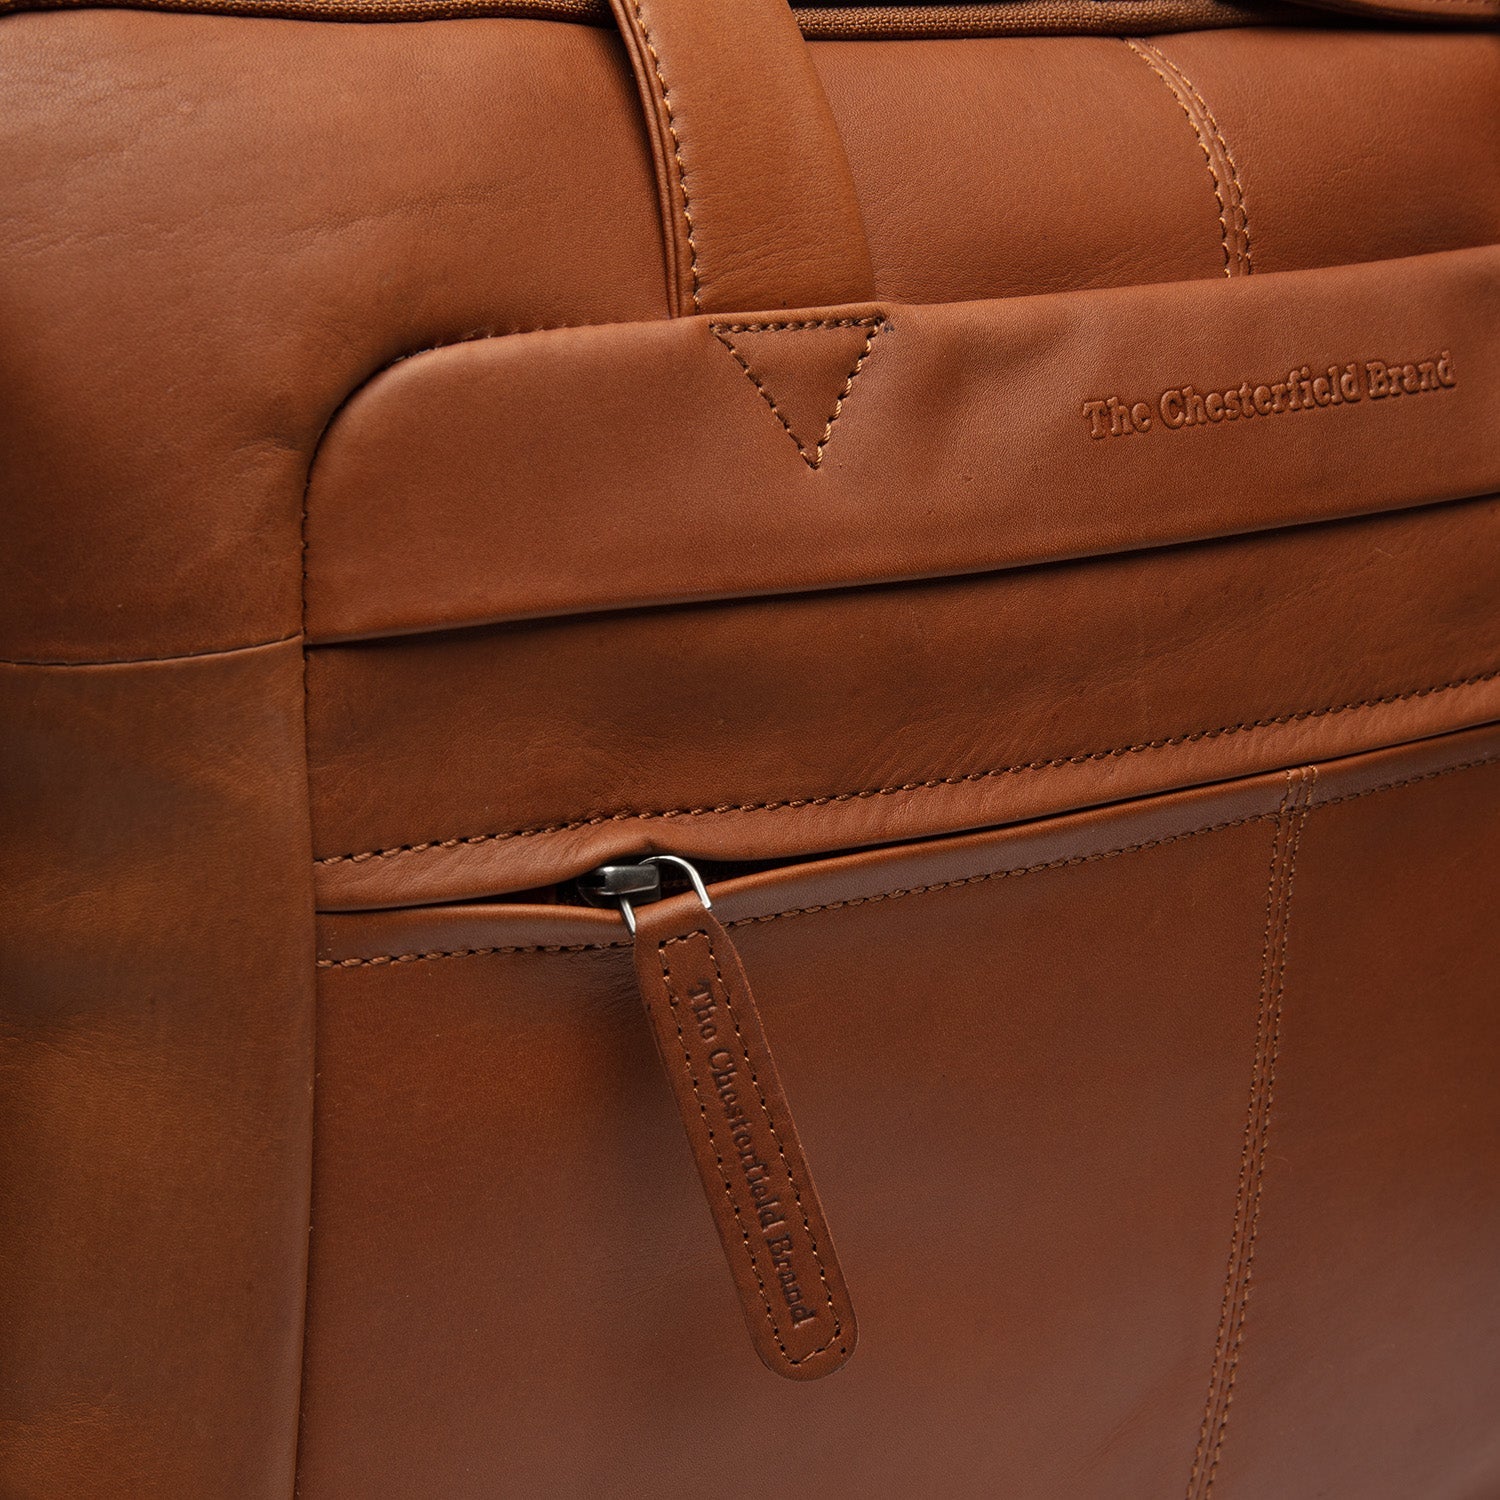 Leather Laptop Bag - The Chesterfield Brand Ryan Cognac